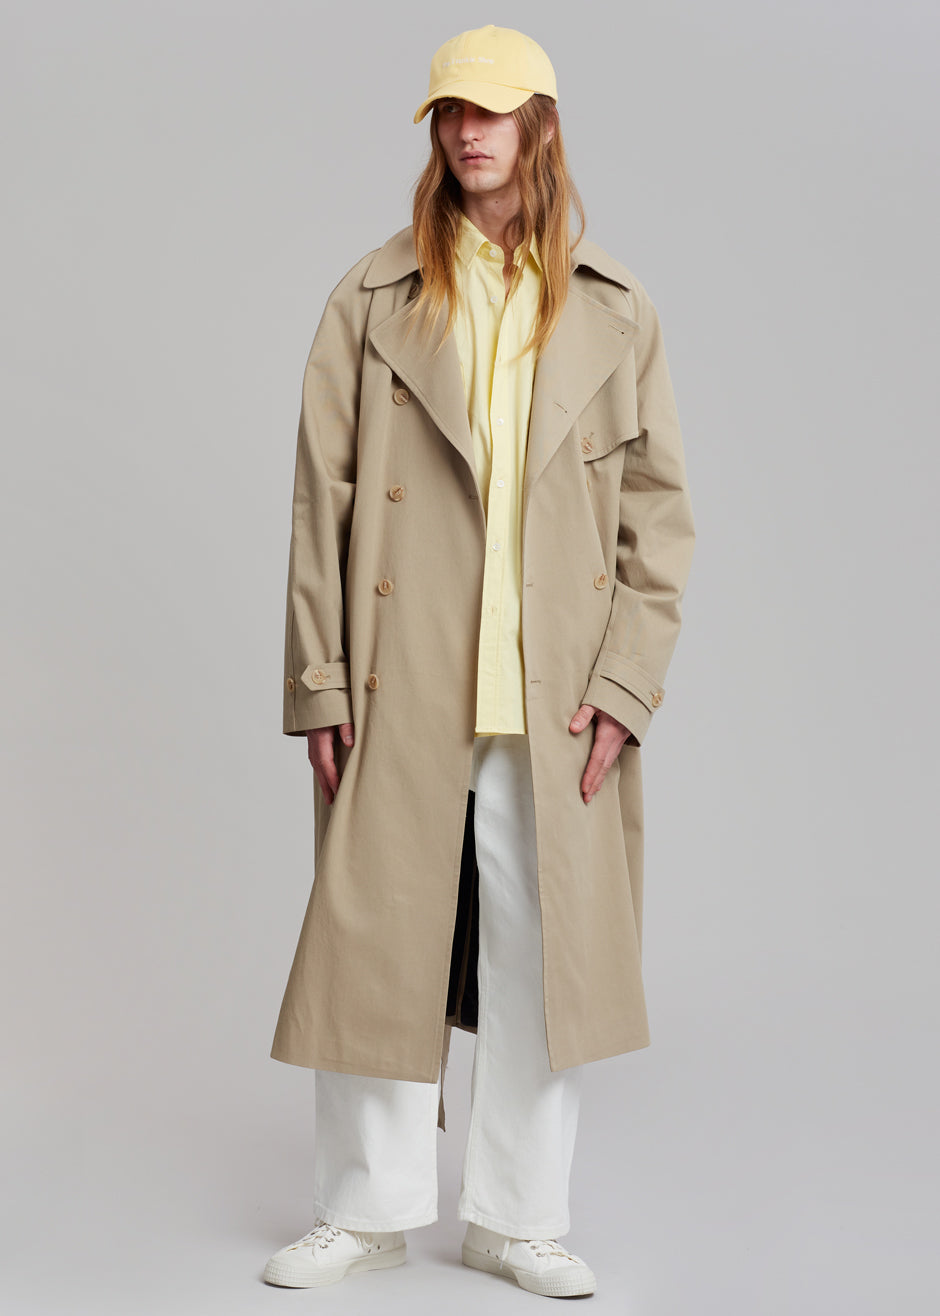 Umi Belted Trench Coat - Beige - 11 - Umi Belted Trench Coat - Beige Coat The Frankie Shop [gender-male]